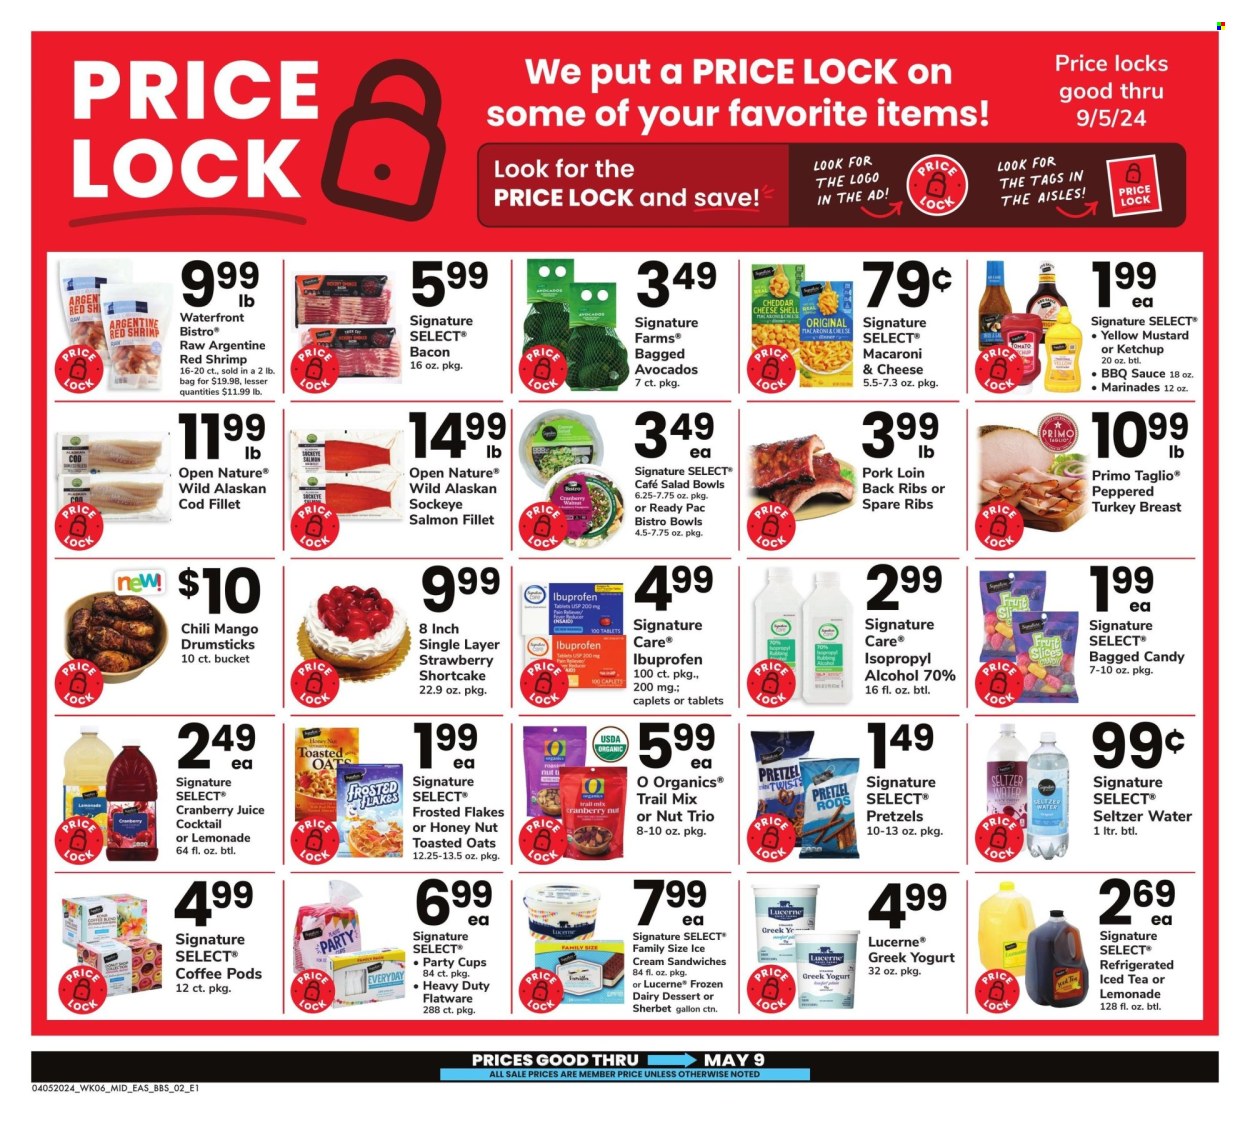 thumbnail - Safeway Flyer - 04/05/2024 - 05/09/2024 - Sales products - pretzels, dessert, salad, avocado, turkey breast, turkey, ribs, pork loin, pork meat, pork spare ribs, cod, fish fillets, salmon, salmon fillet, alaskan cod fillet, shrimps, macaroni & cheese, sandwich, pasta, Ready Pac, ready meal, greek yoghurt, sherbet, frozen dessert, Candy, Frosted Flakes, toasted oats, BBQ sauce, mustard, ketchup, marinade, trail mix, cranberry juice, lemonade, fruit drink, ice tea, seltzer water, water, coffee, coffee pods, bucket, flatware, salad bowl, party cups, Ibuprofen, pain therapy, sauce. Page 2.